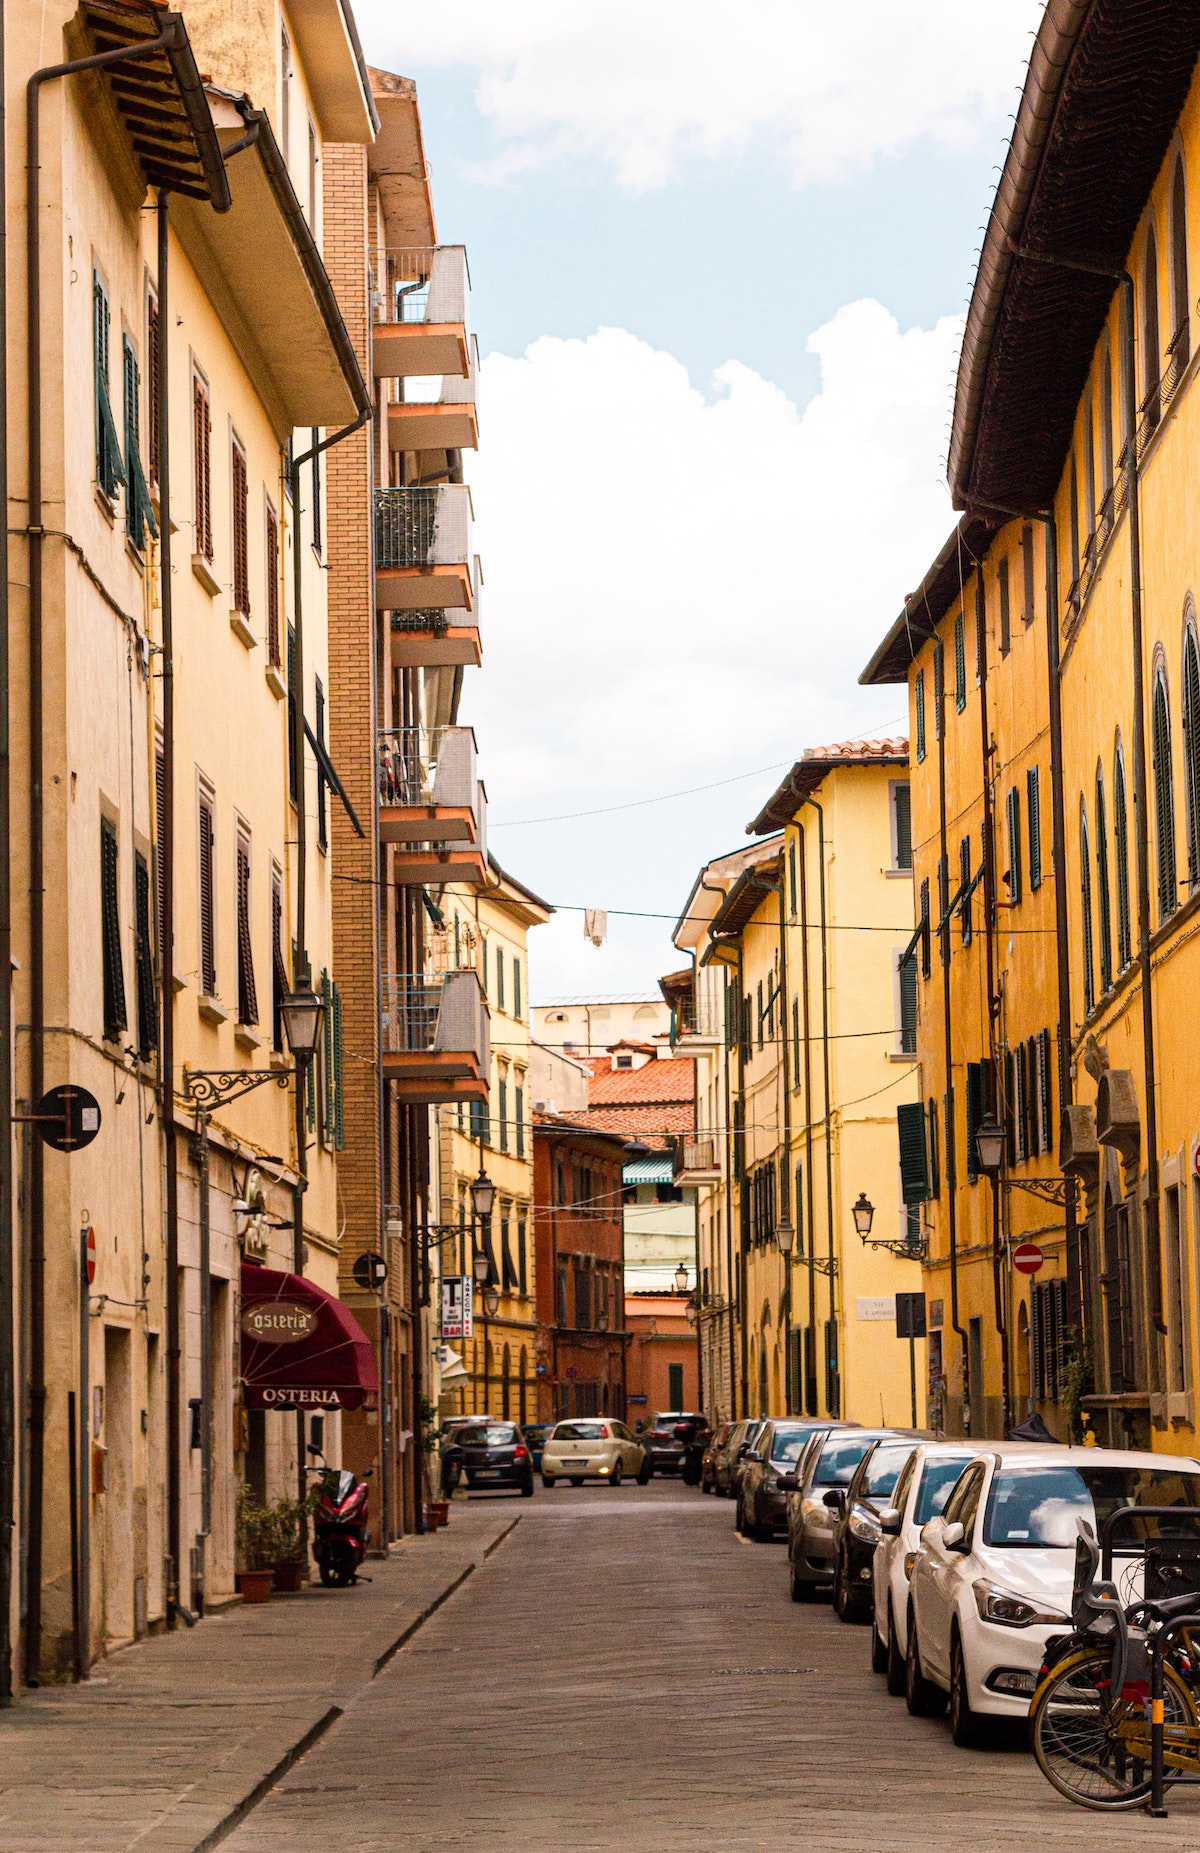 Light-colored multi-story buildings lining a narrow street in Florence, Italy